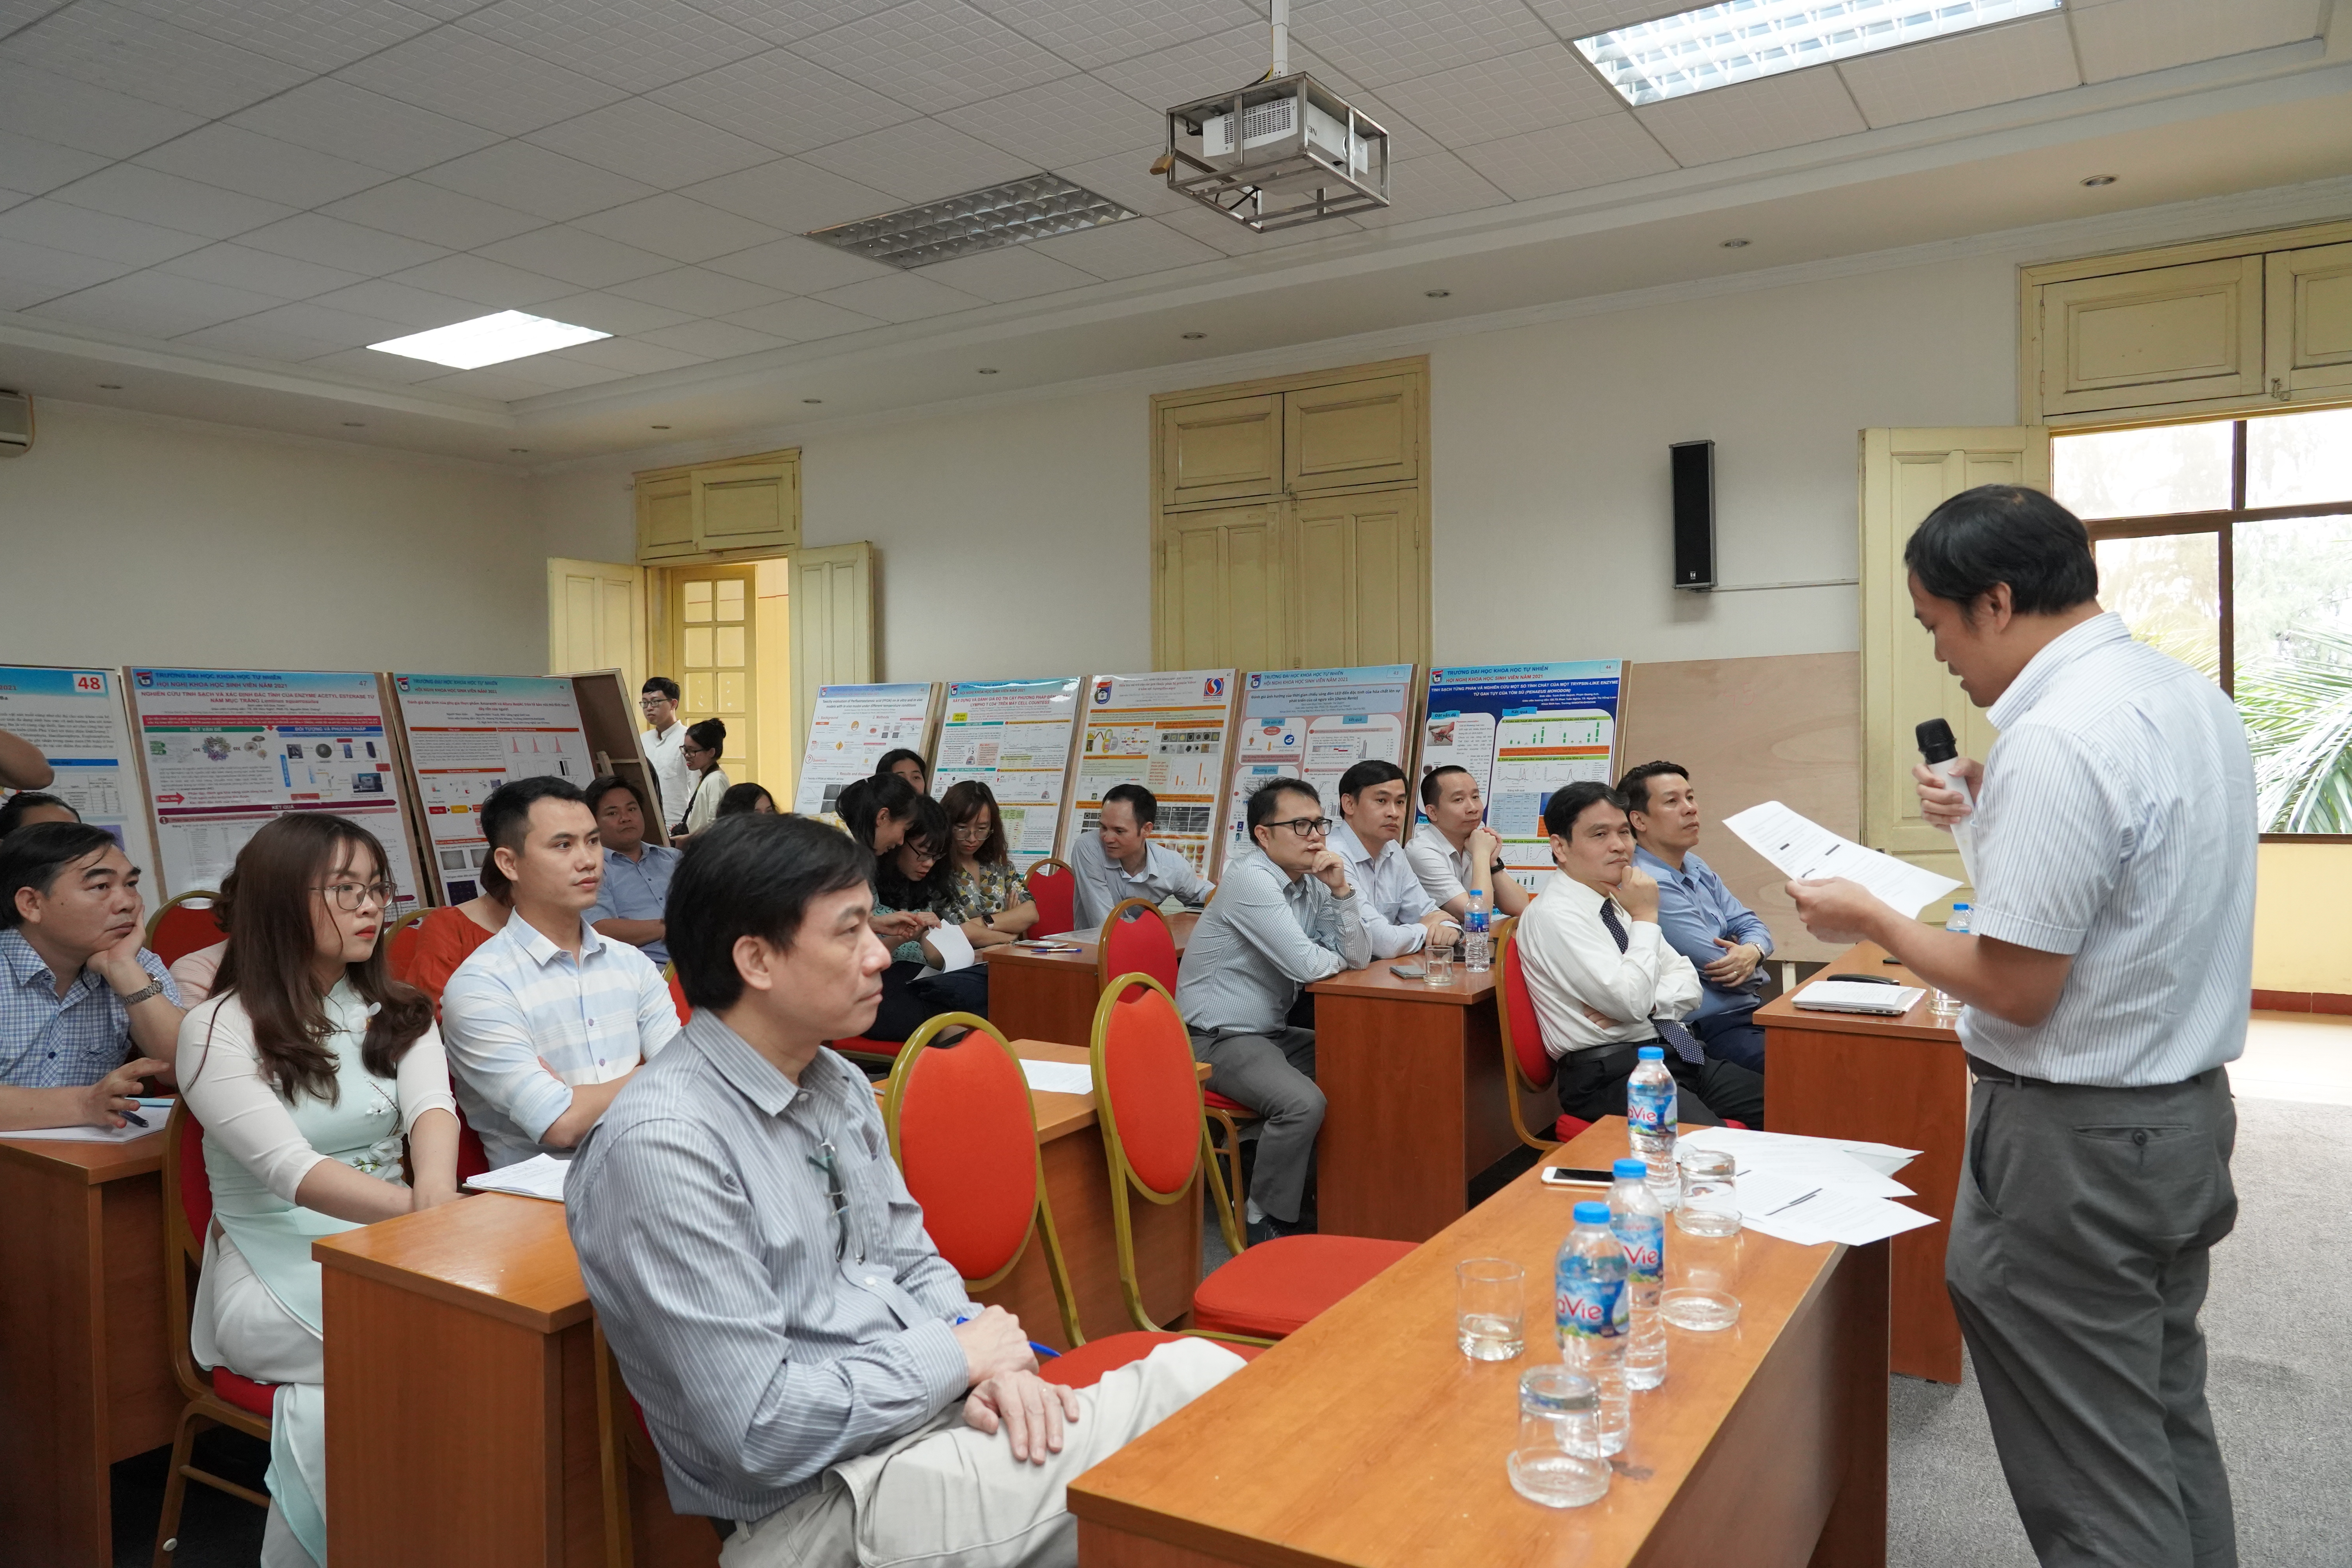 2021 Student Scientific Conference held at the VNU University of Science